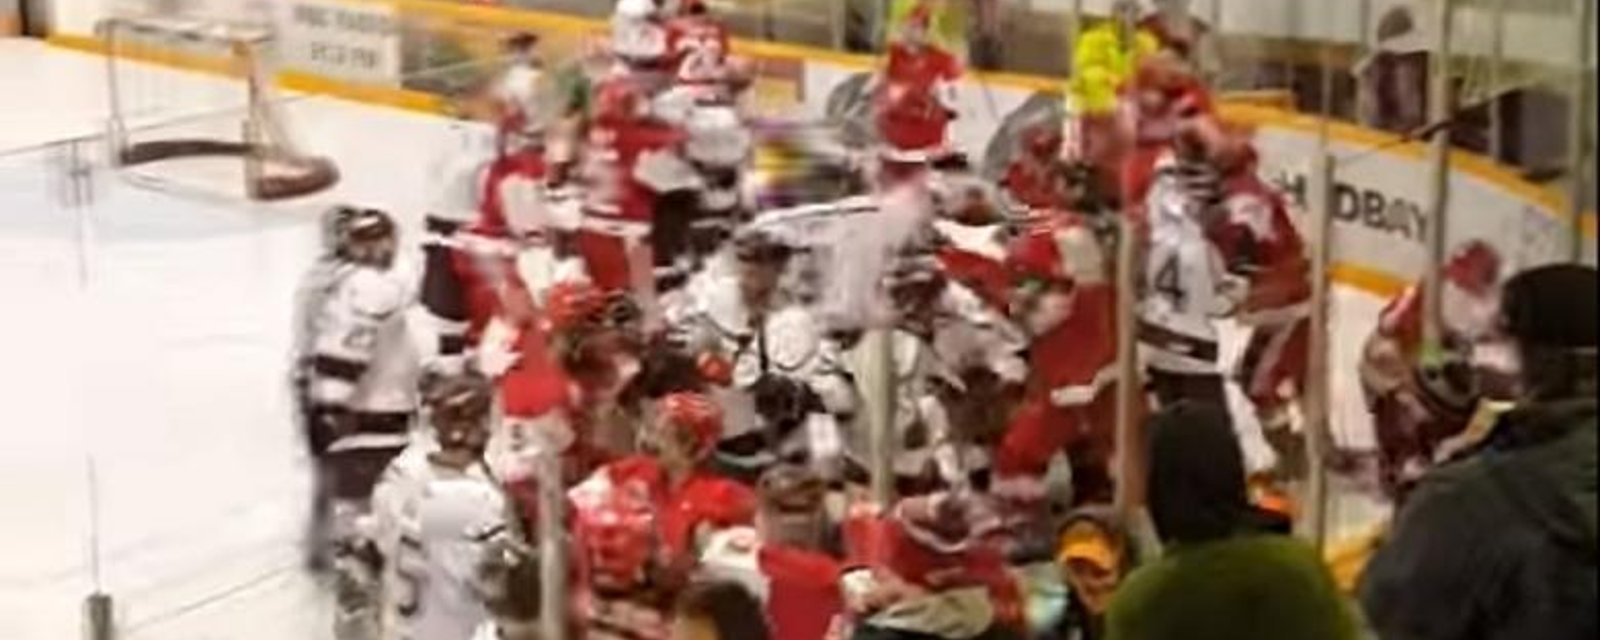 Brawl breaks out after fans throw animal parts on the ice.